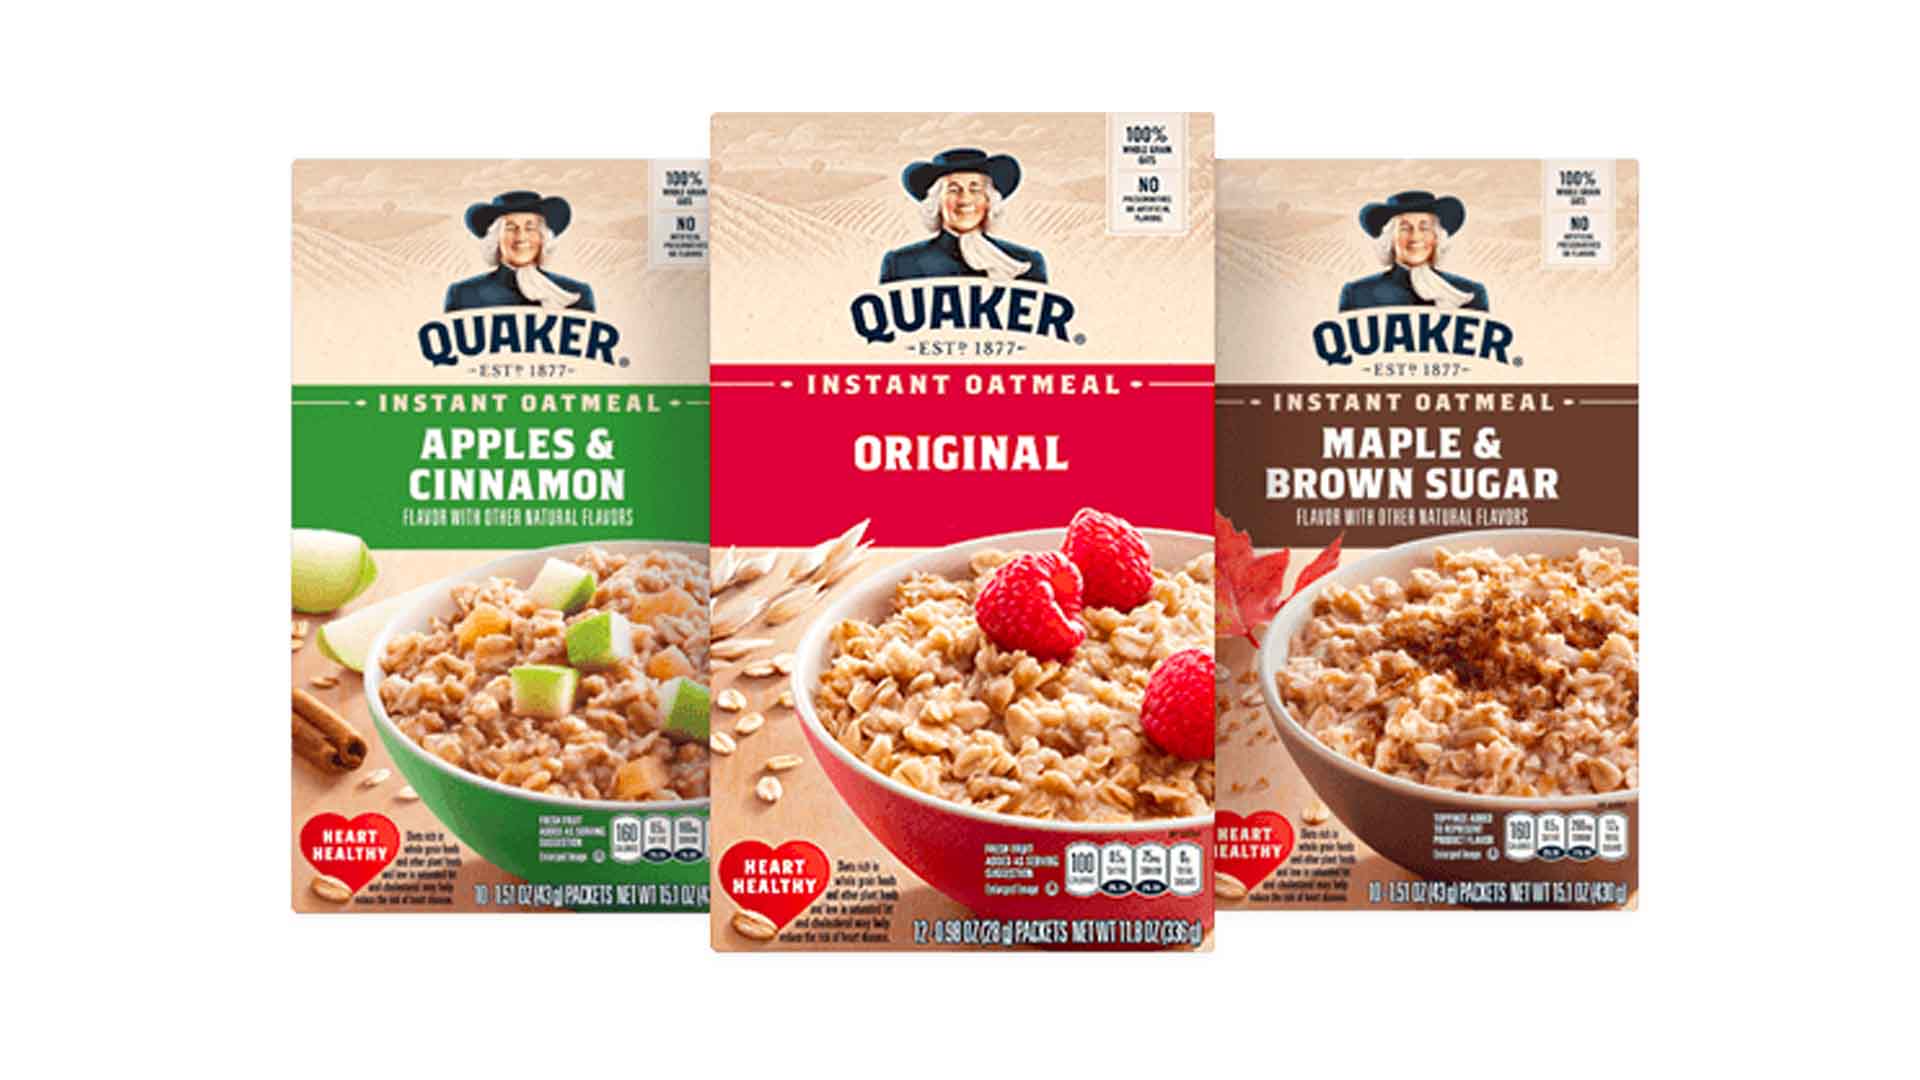 Quaker Oats Recalls More Products Due to Salmonella Outbreak